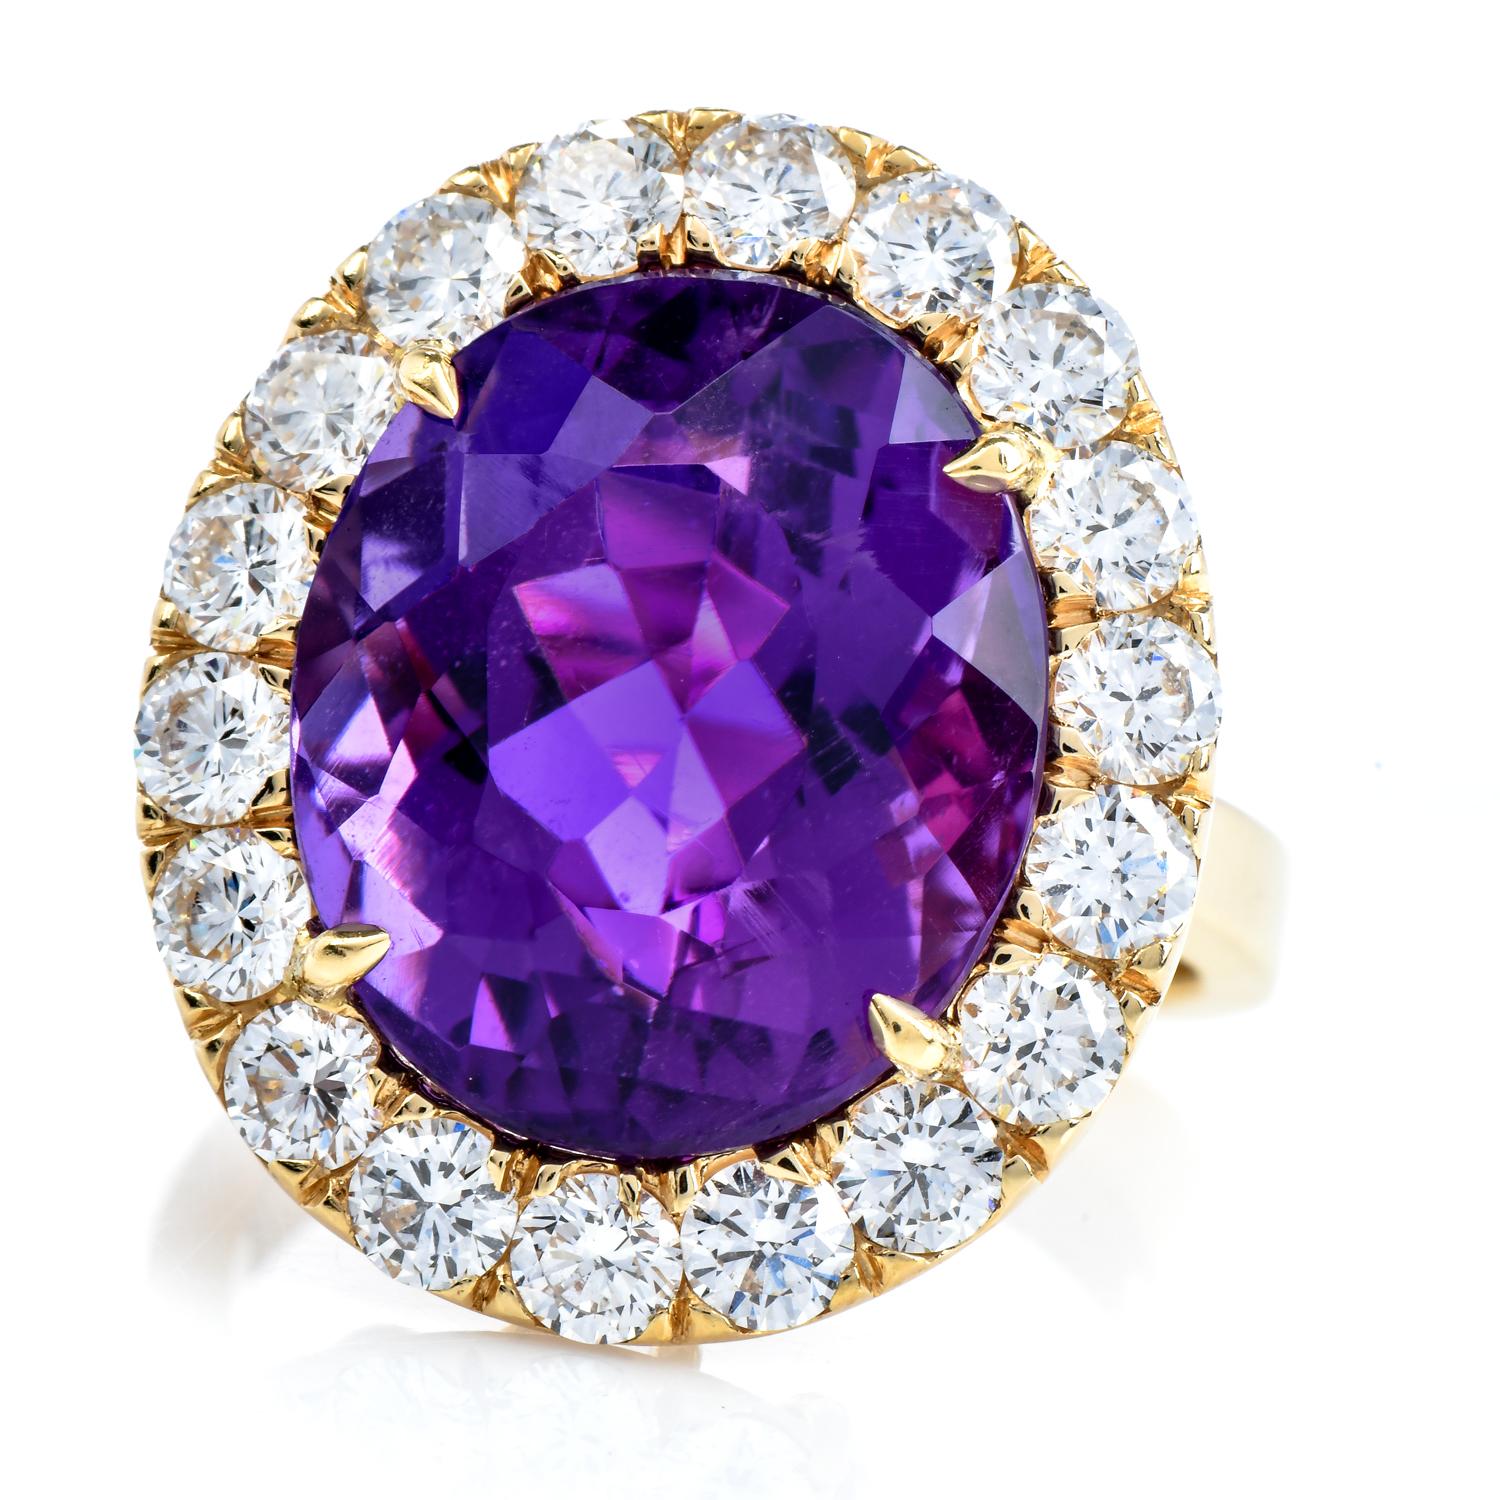 An exquisite Vivid Fine Amethyst surrounded by a diamond halo is a timeless look impossible to ignore!

this glamorous ring is crafted in solid 18K Yellow Gold.

Consists of approx. 10.00 carat Amethyst, surrounded by 18 round-cut diamonds, weighing